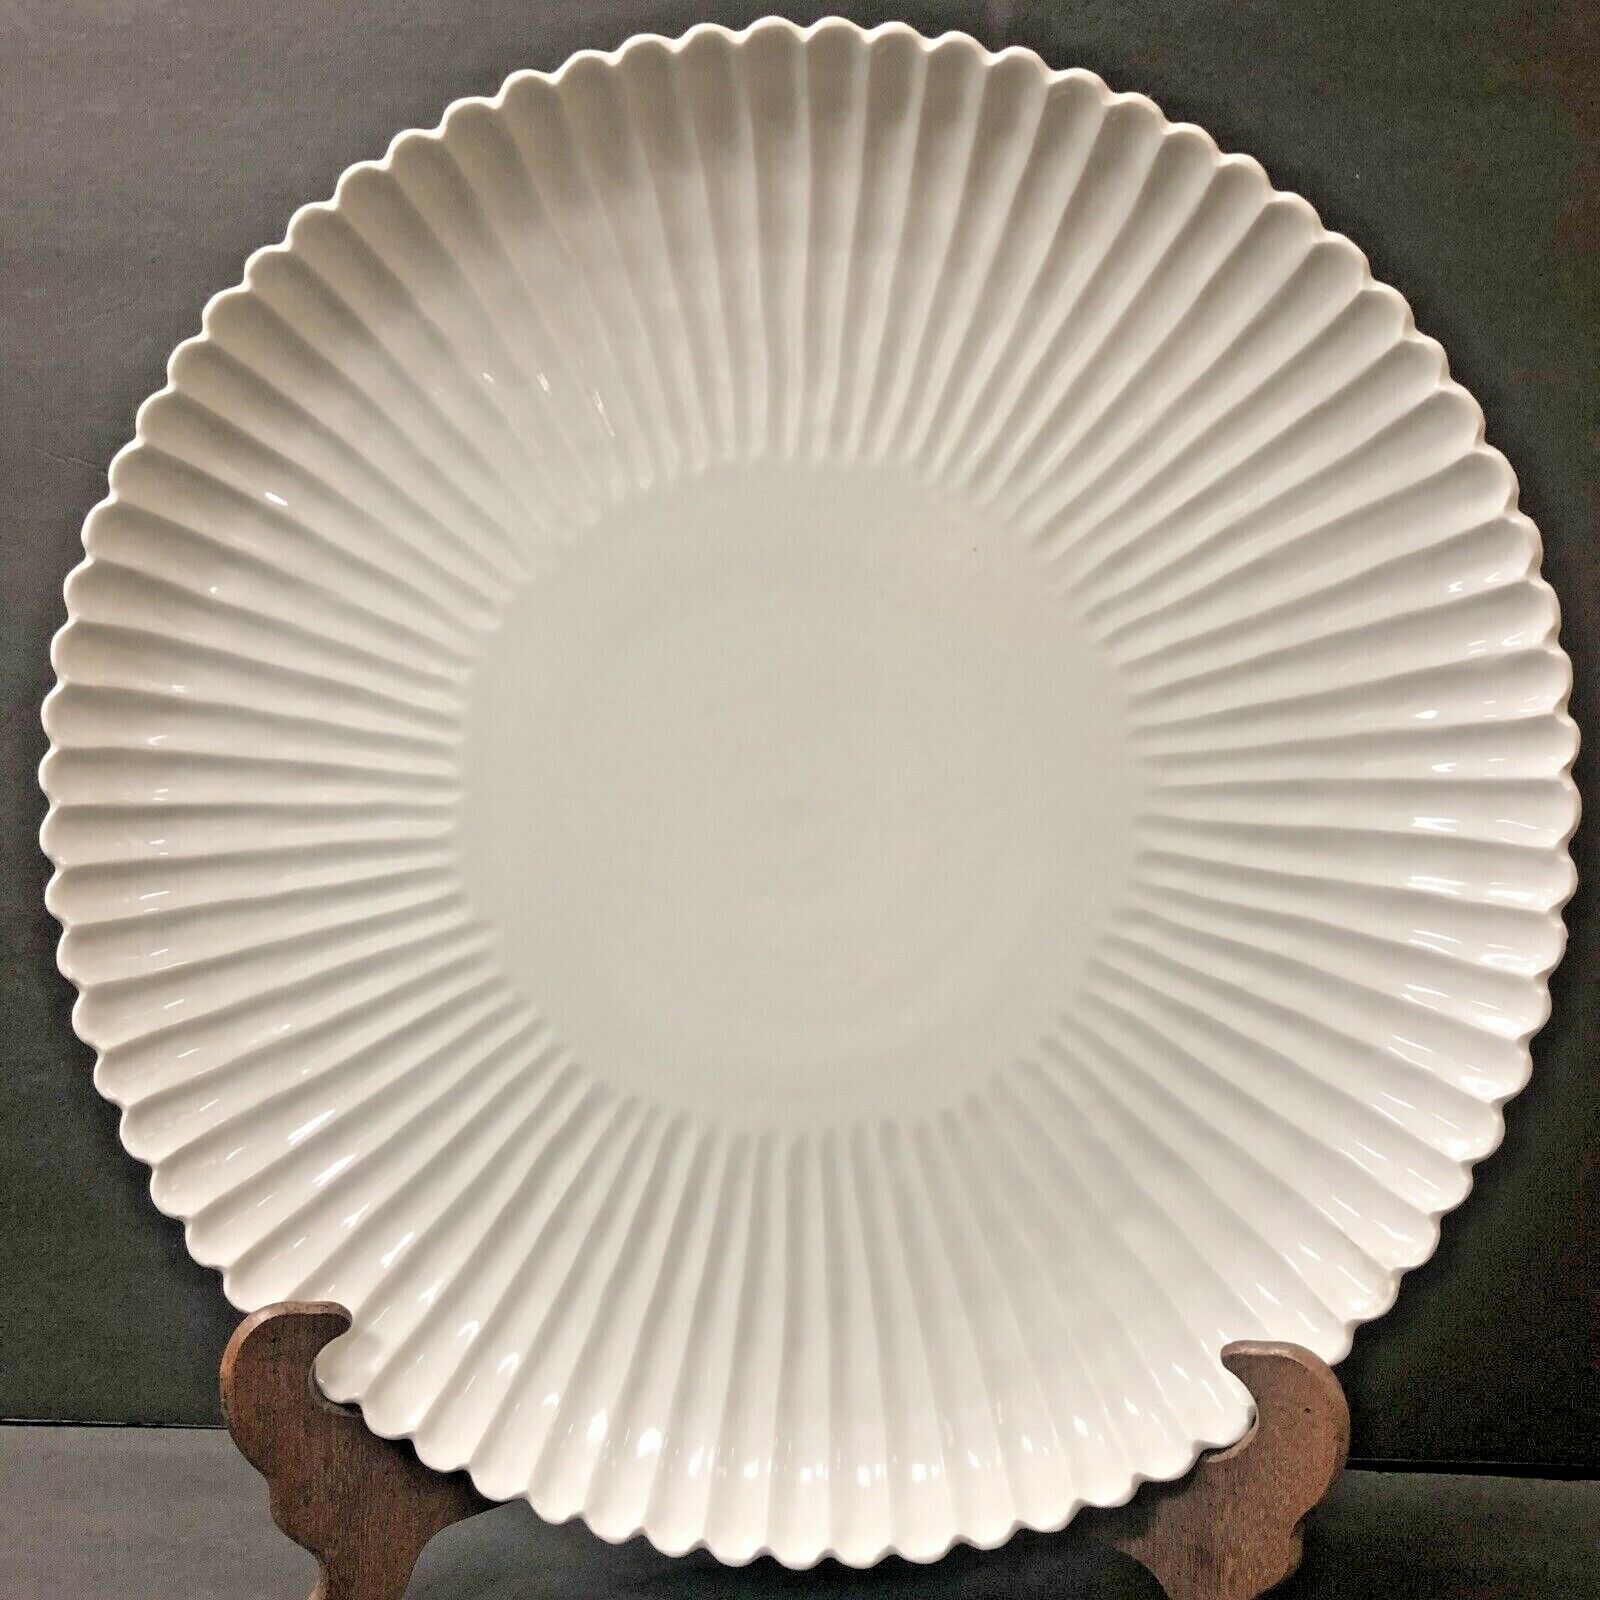 Chinese Glazed Porcelain Charger, 16 1/4”